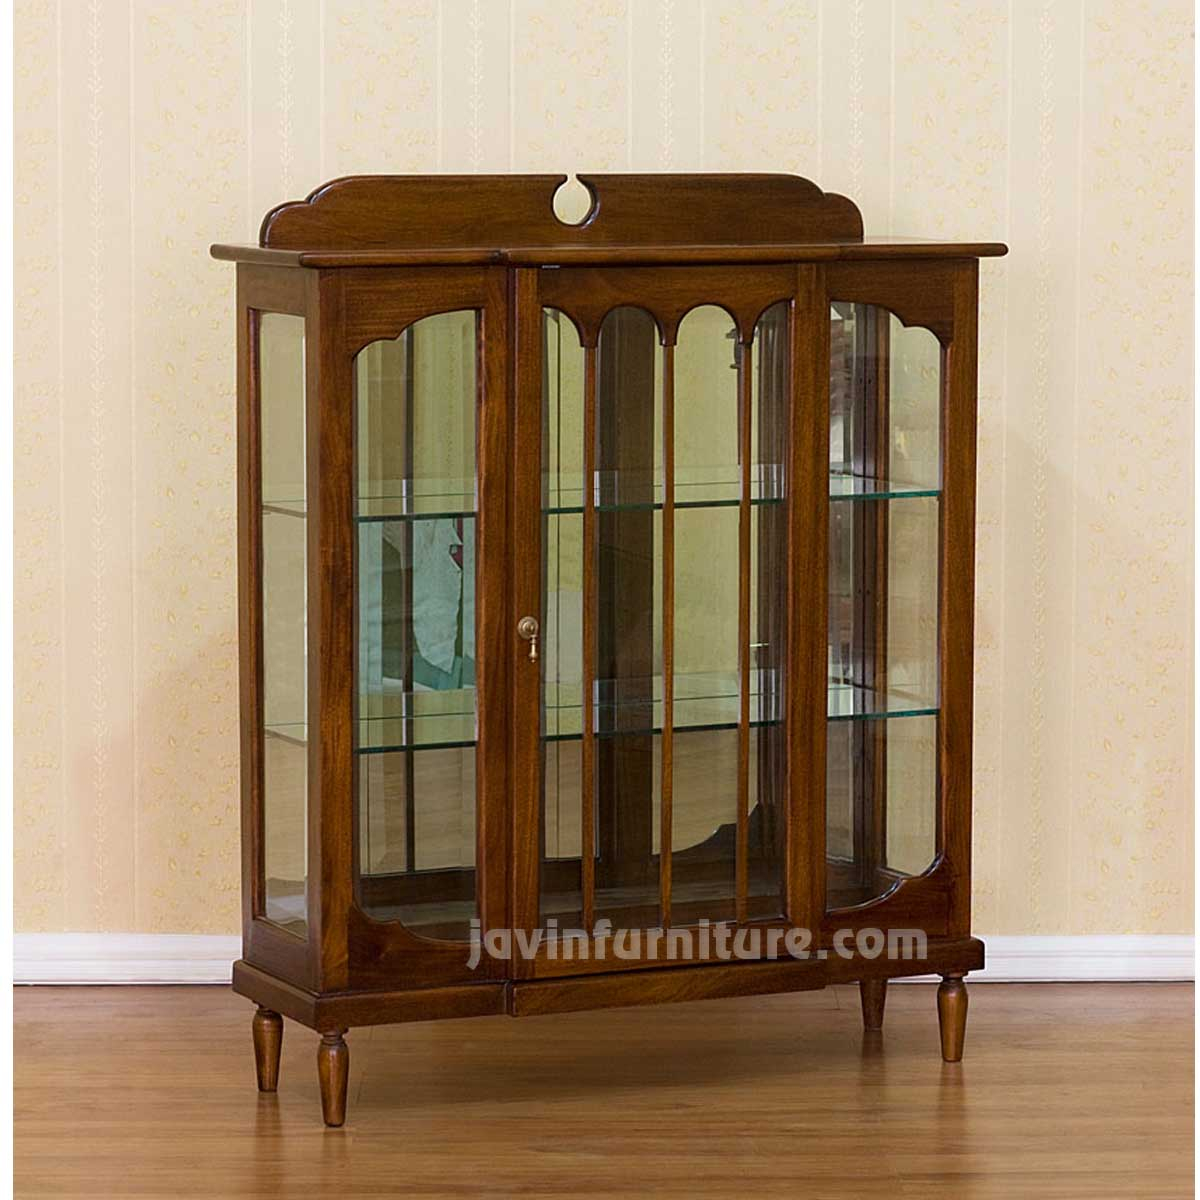 Small Display Cabinets With Glass Doors Image Collections Doors in size 1200 X 1200